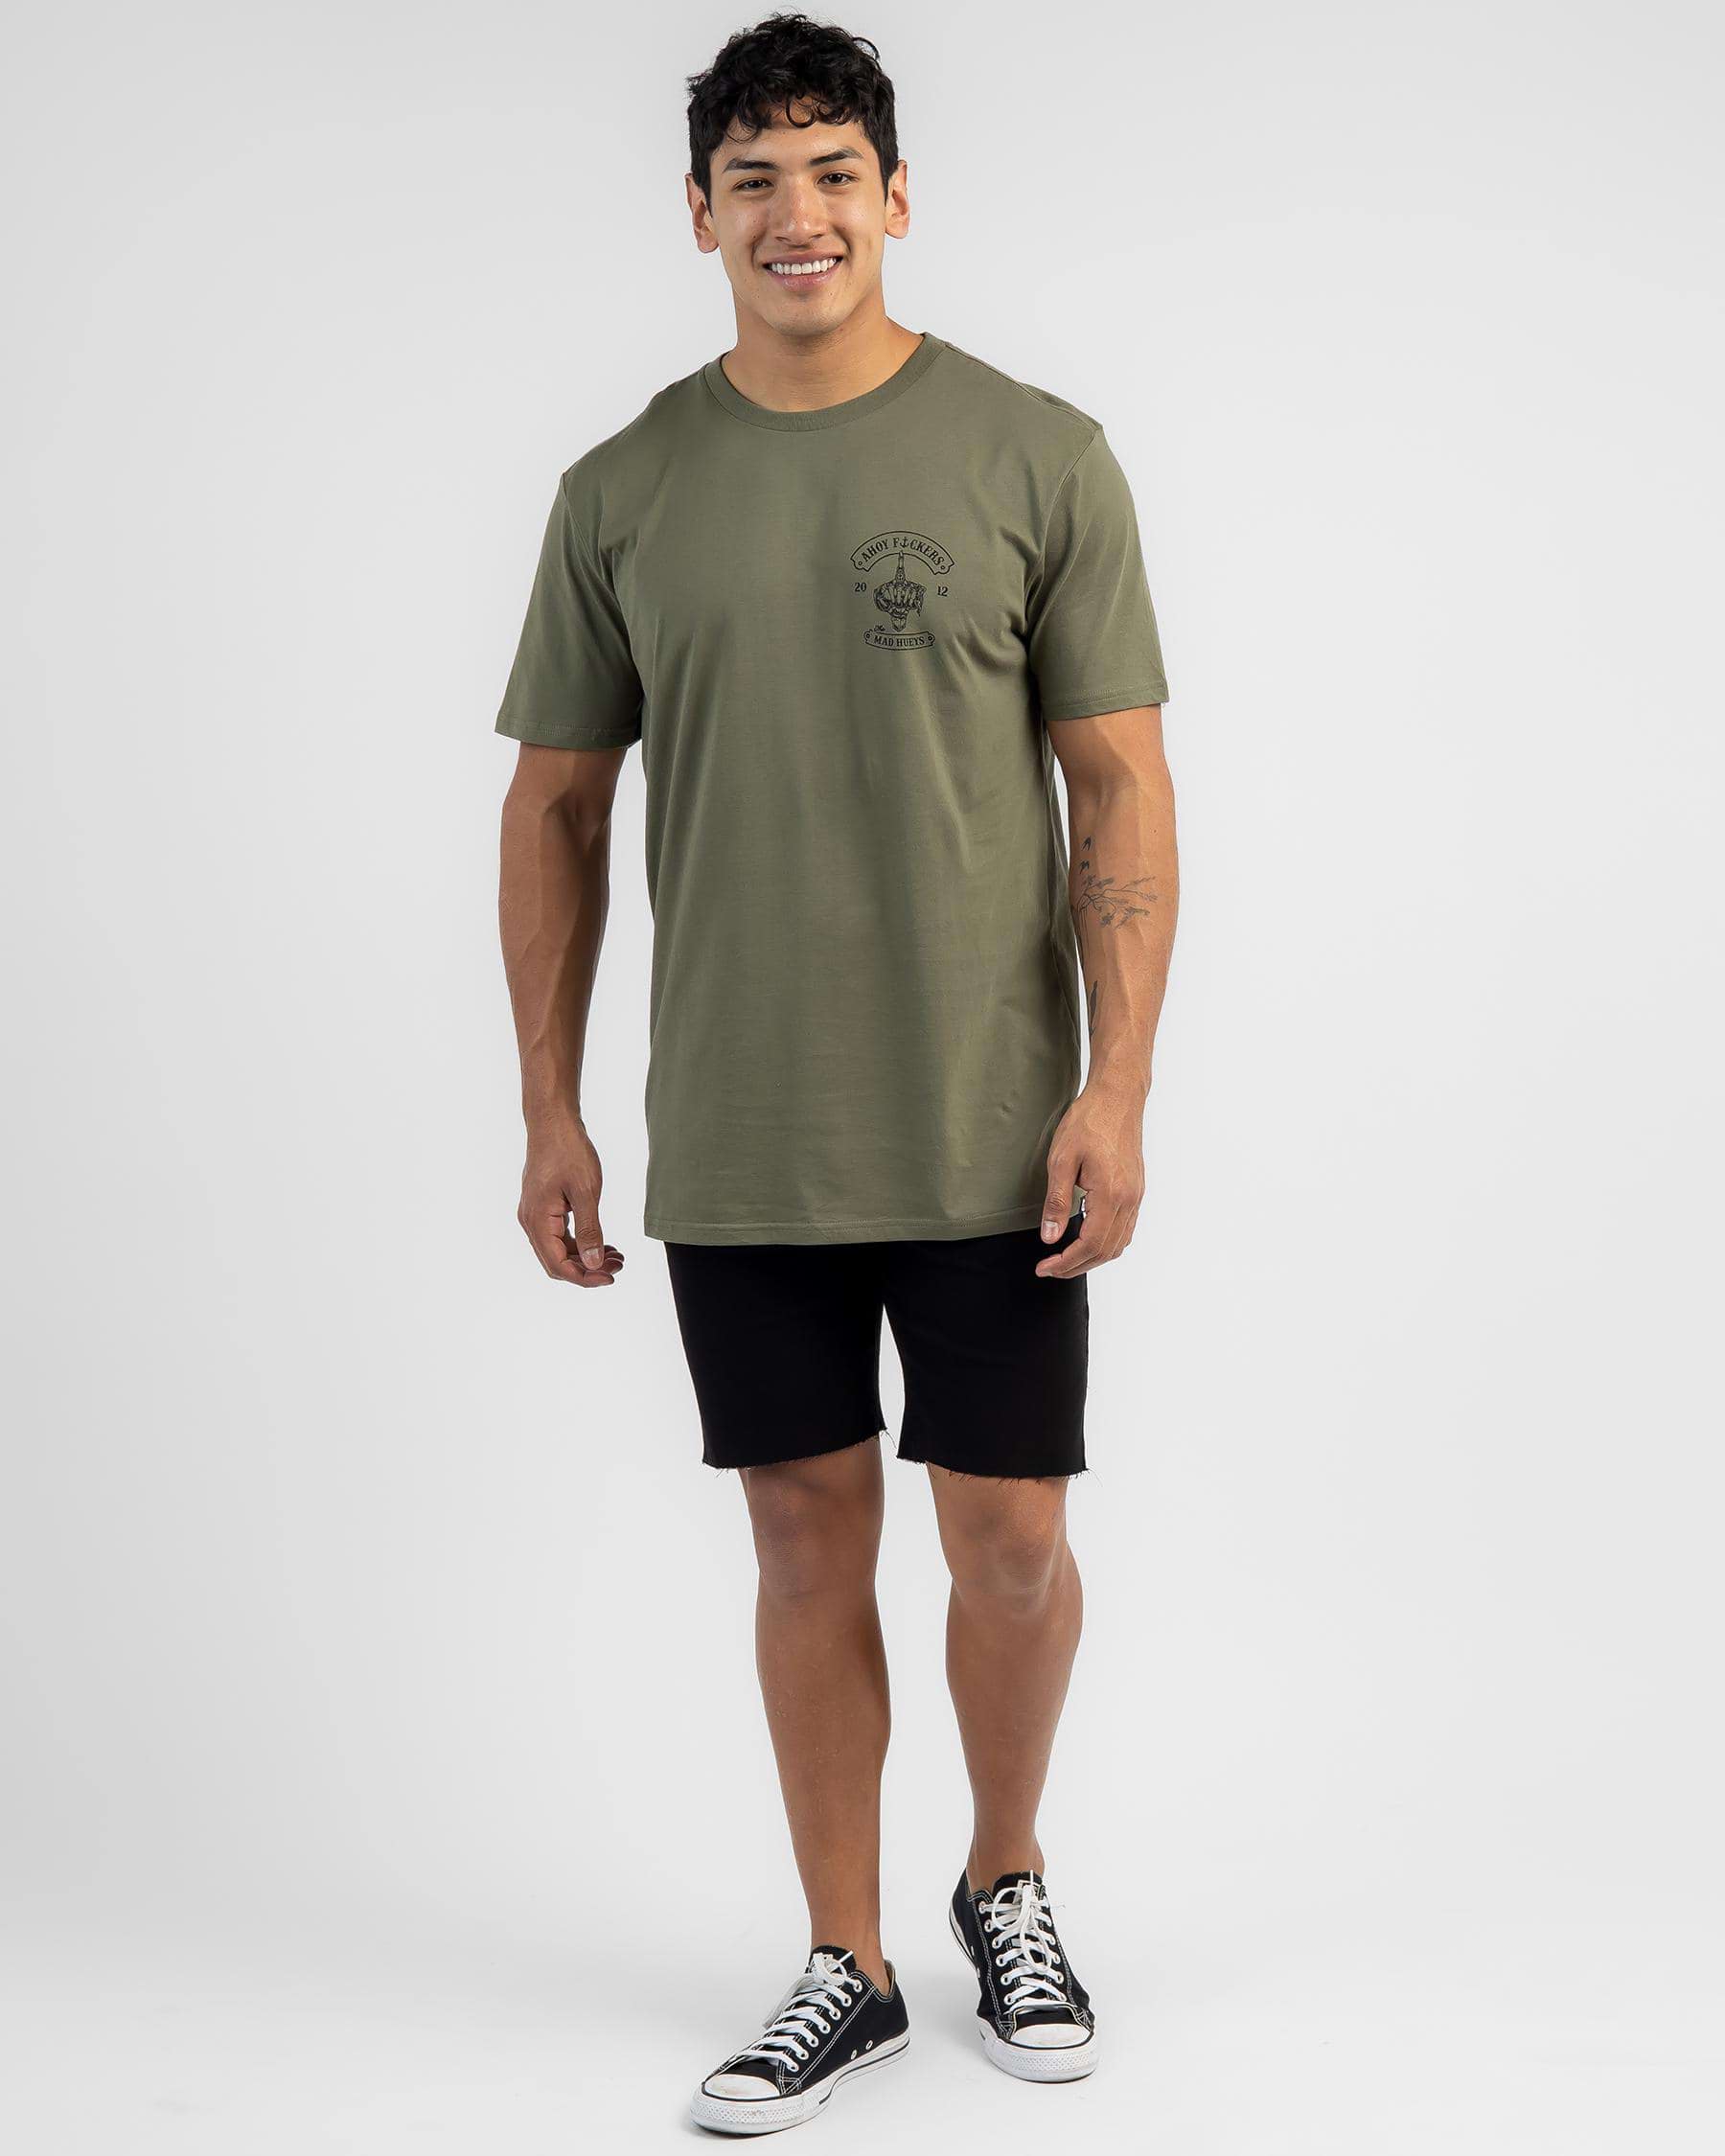 Shop The Mad Hueys Ahoy Ahoy Fkr T-Shirt In Dusty Green - Fast Shipping ...